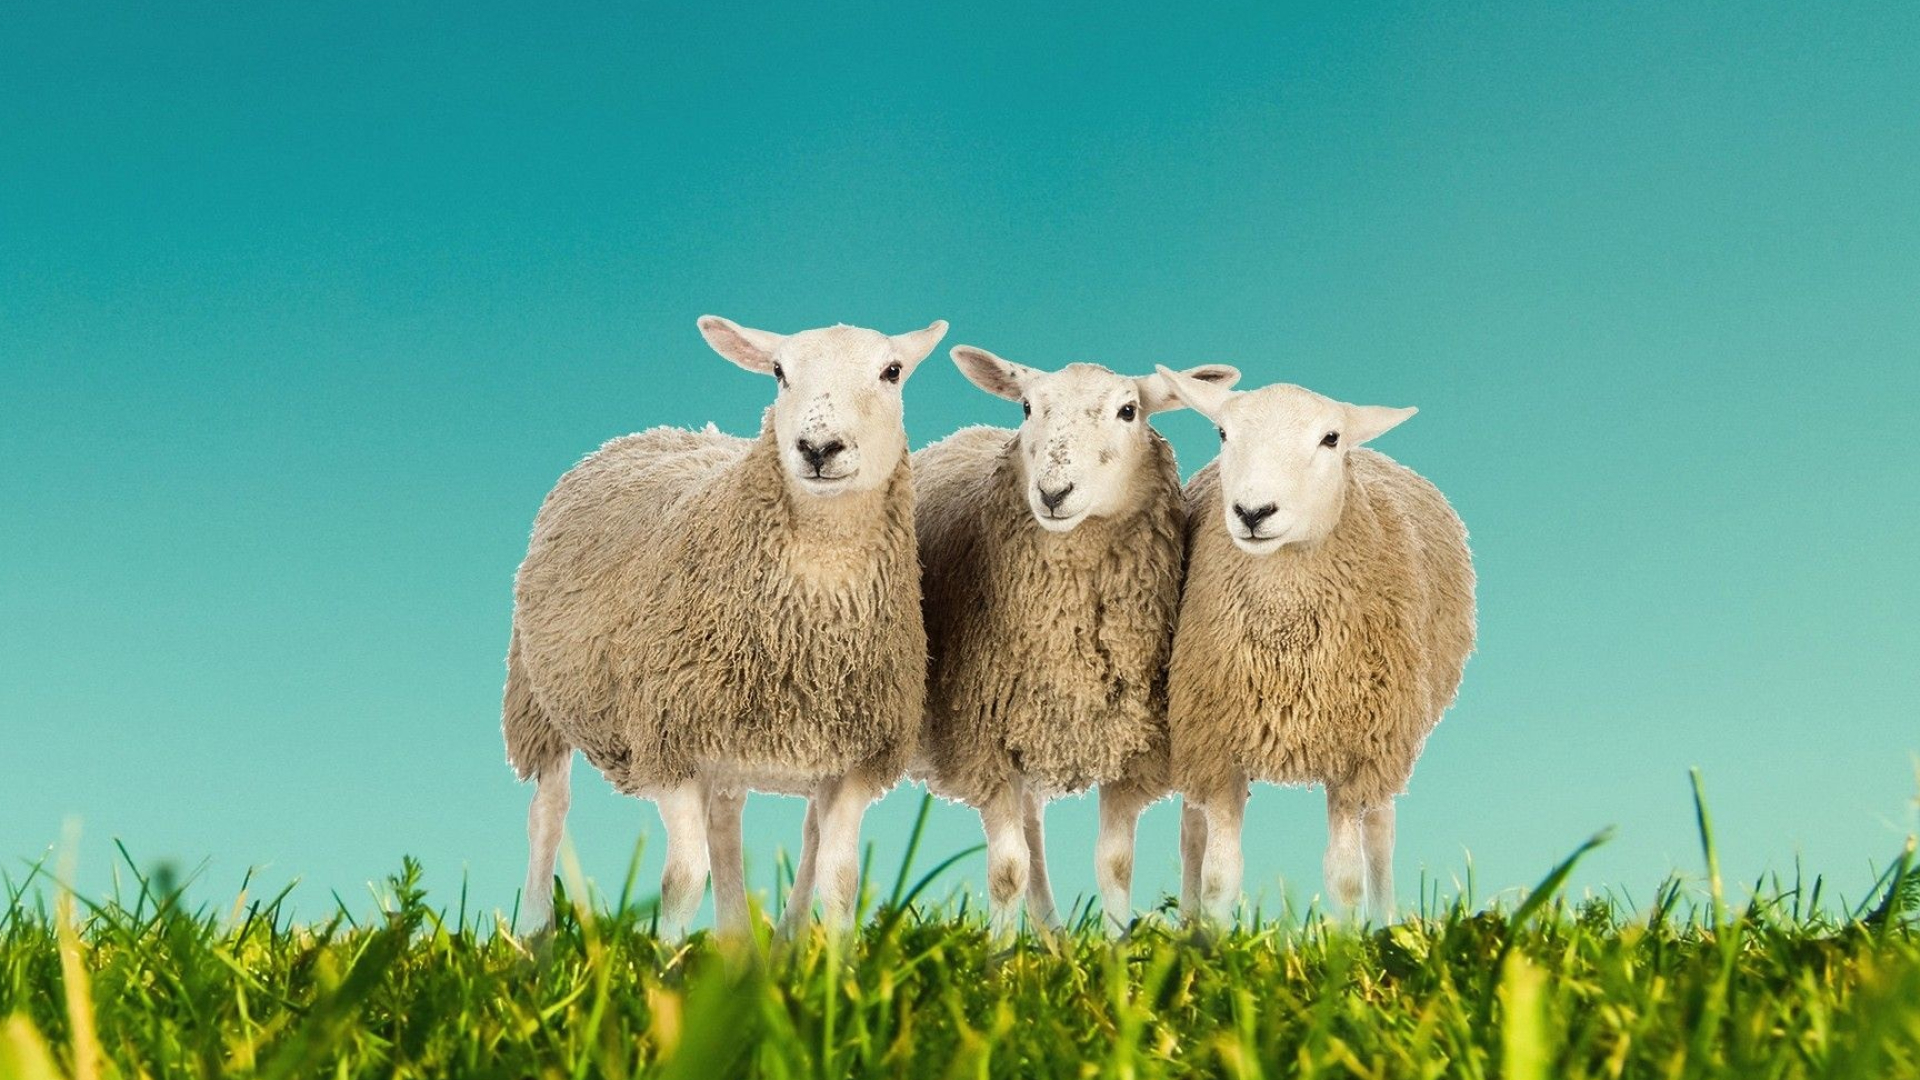 Sheep computer wallpapers, Stunning visual backgrounds, Perfect for desktops, High-quality images, 1920x1080 Full HD Desktop